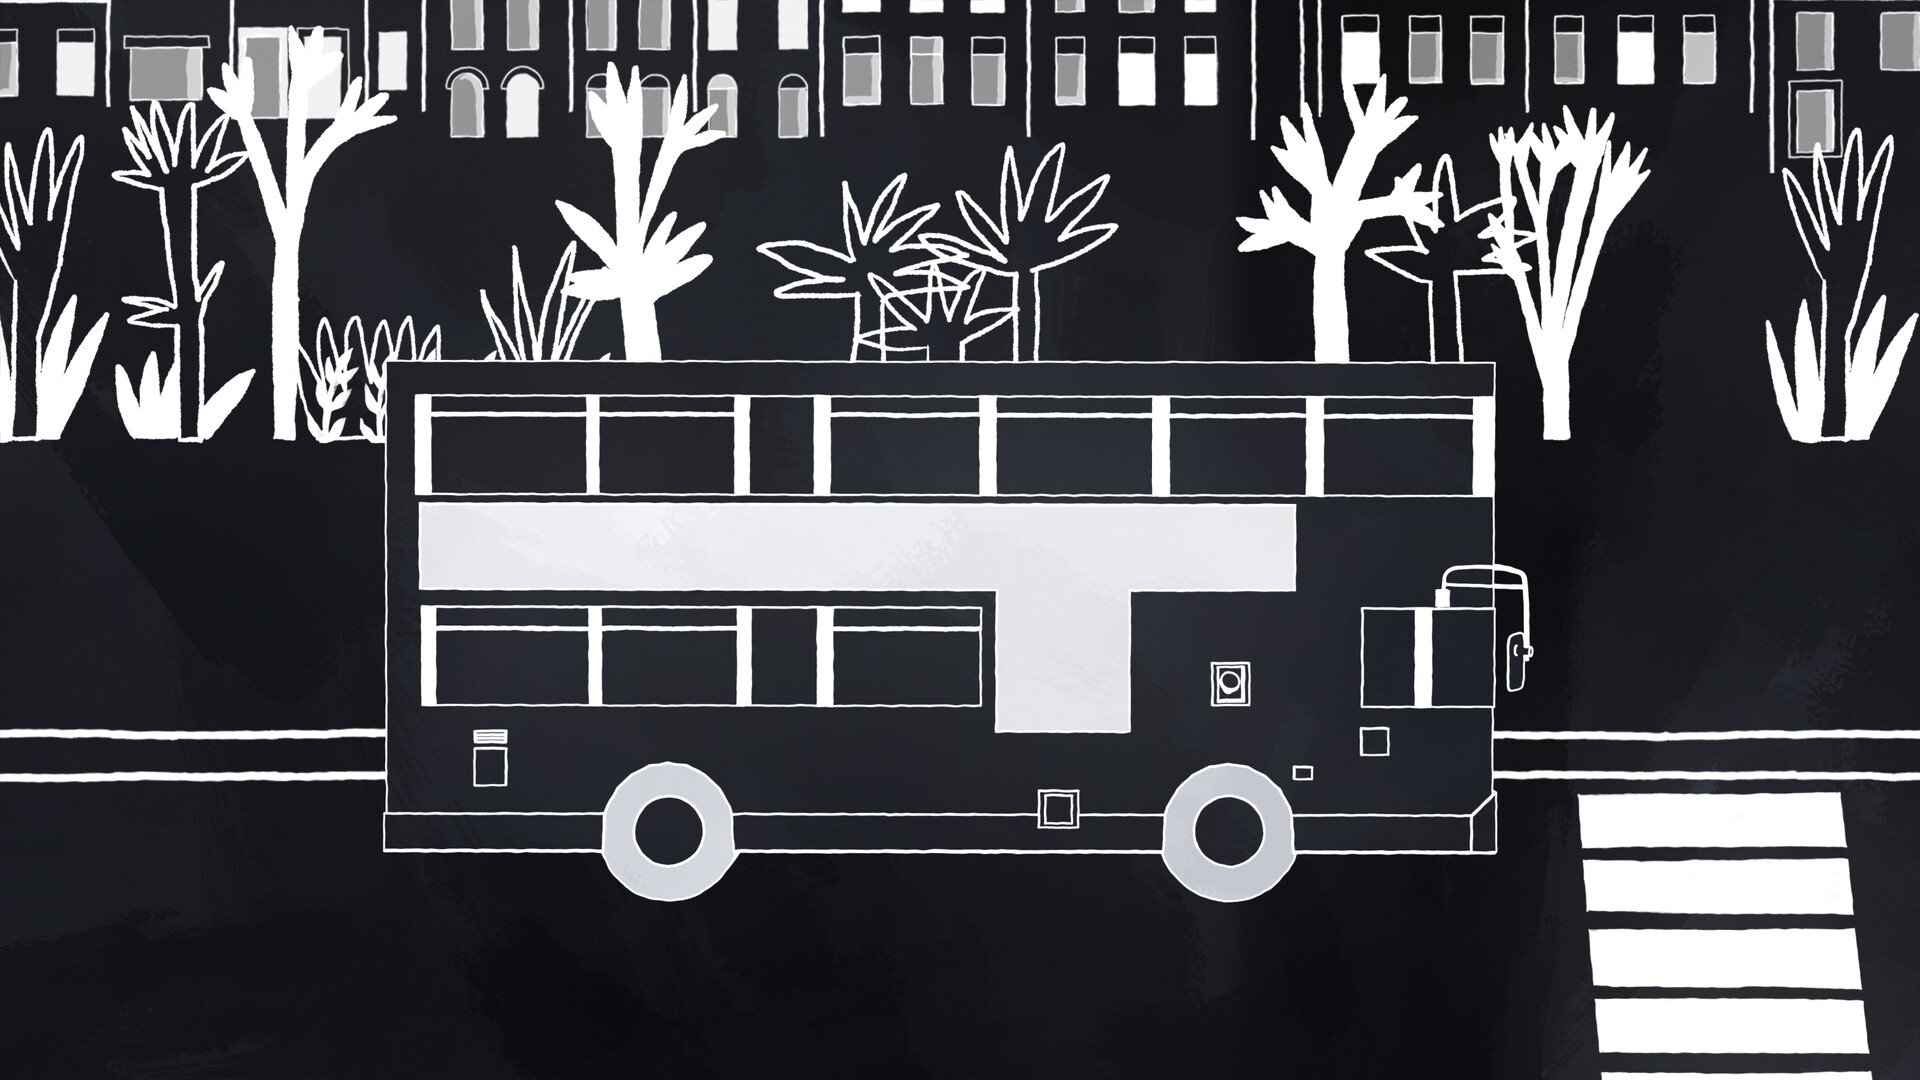 Black and white animated image of a bus on road